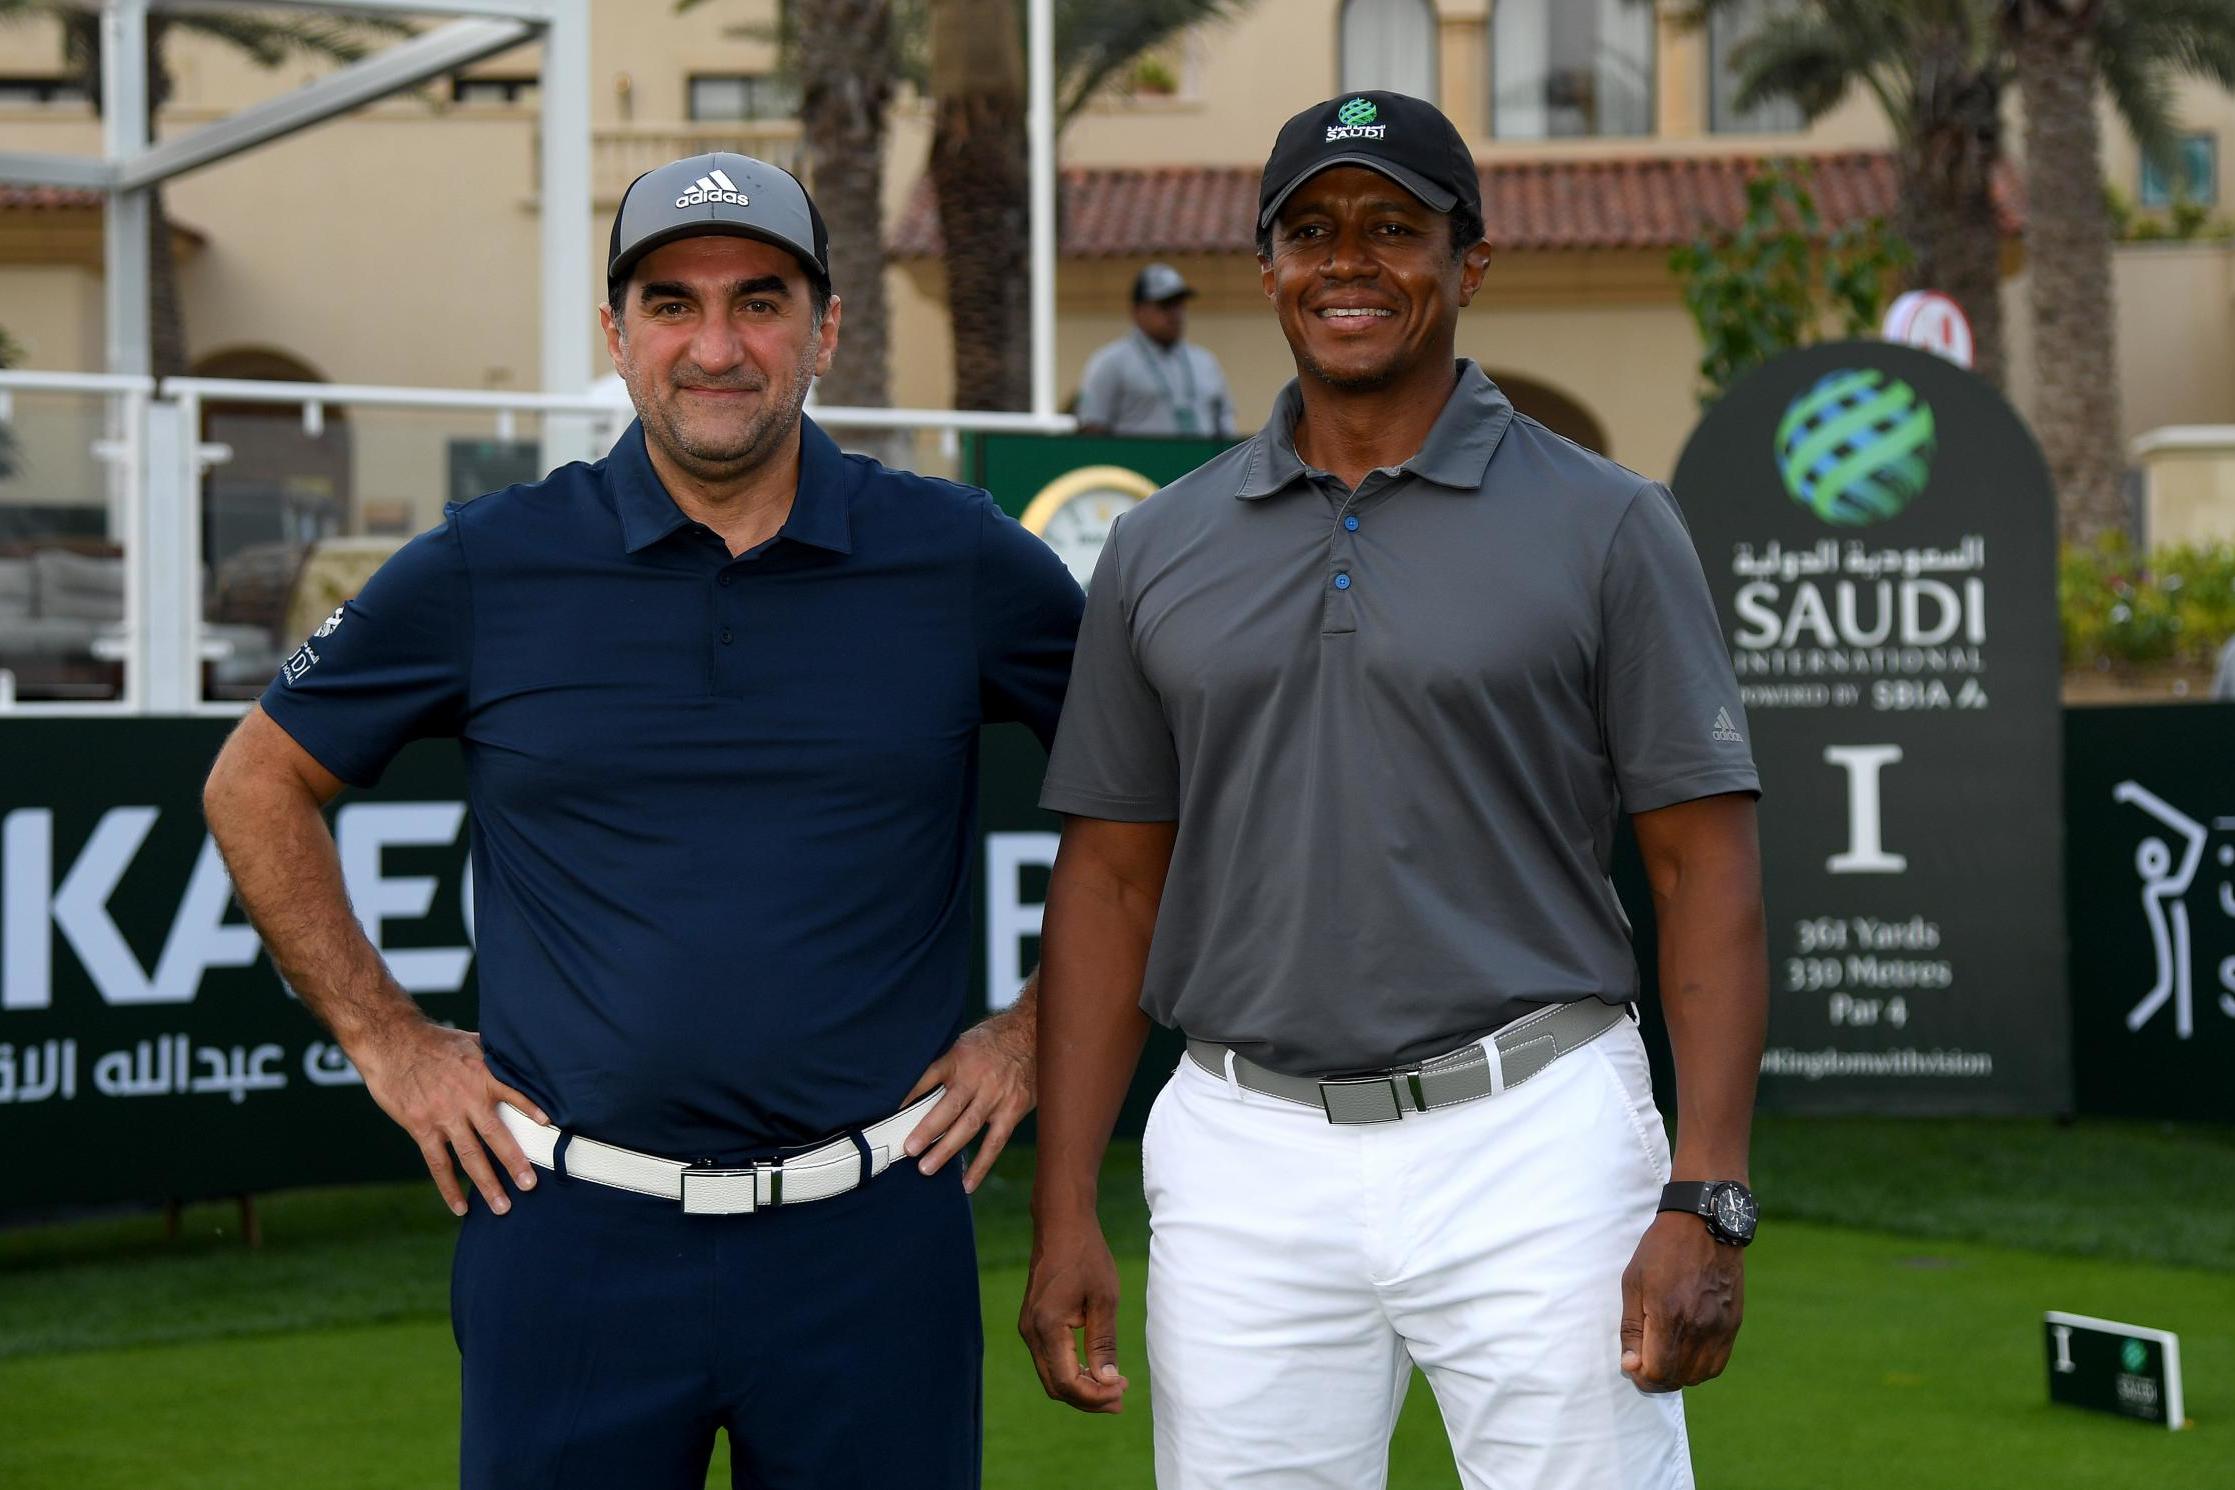 Al-Rumayyan, here with Majed Al Sorour, CEO of the Saudi Golf Federation, is an enthusiastic golfer, playing off a handicap of 12